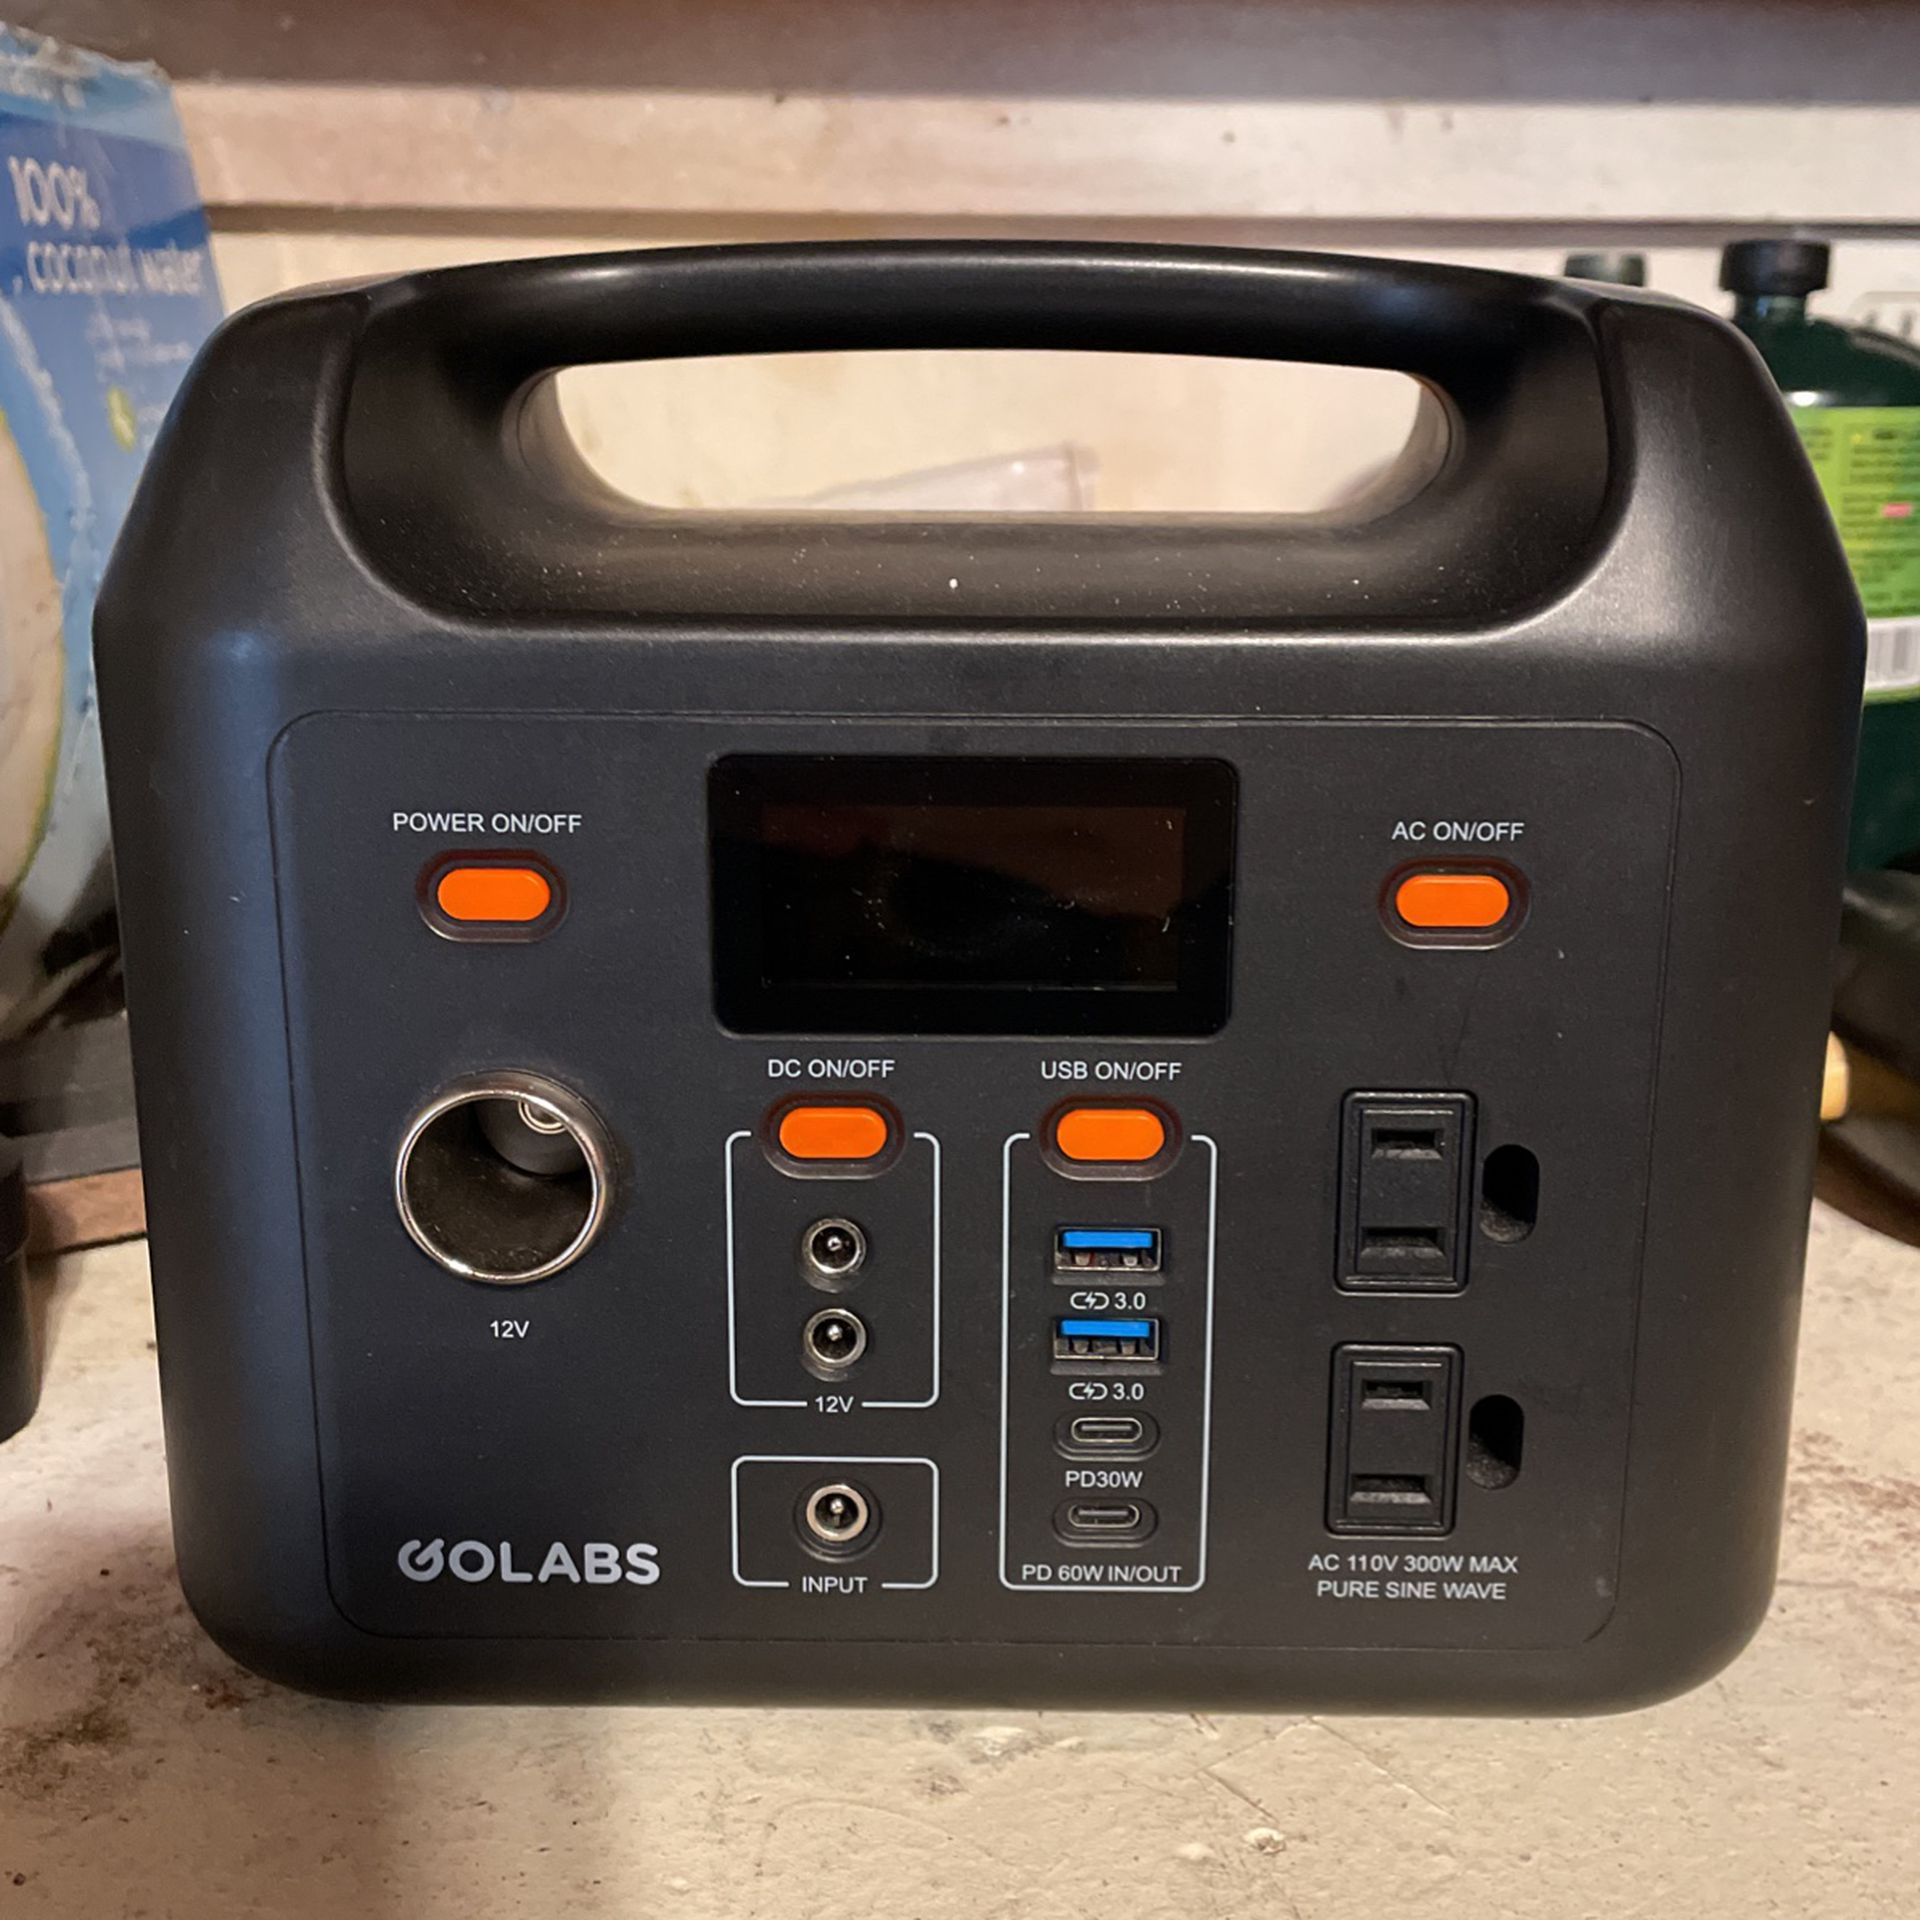 GoLabs Portable Power station